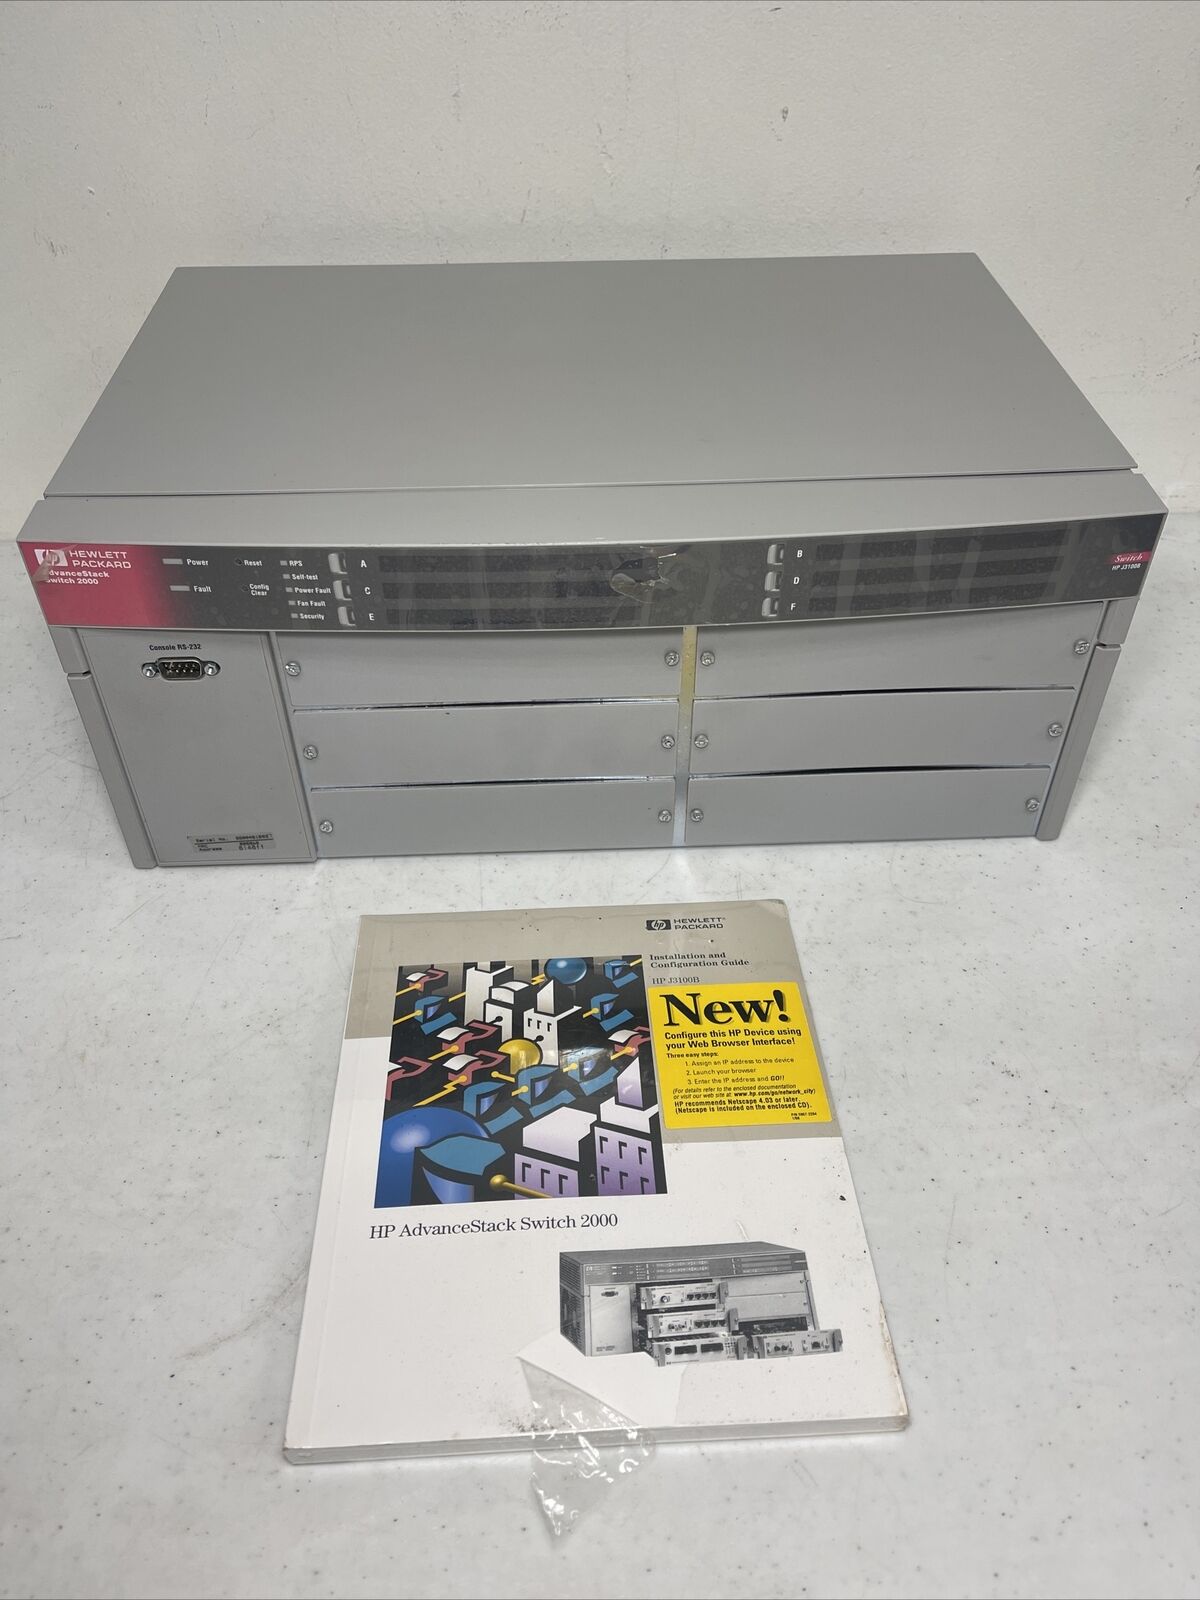 HP J3100B AdvanceStack Switch 2000 with Installation and Configuration Guide